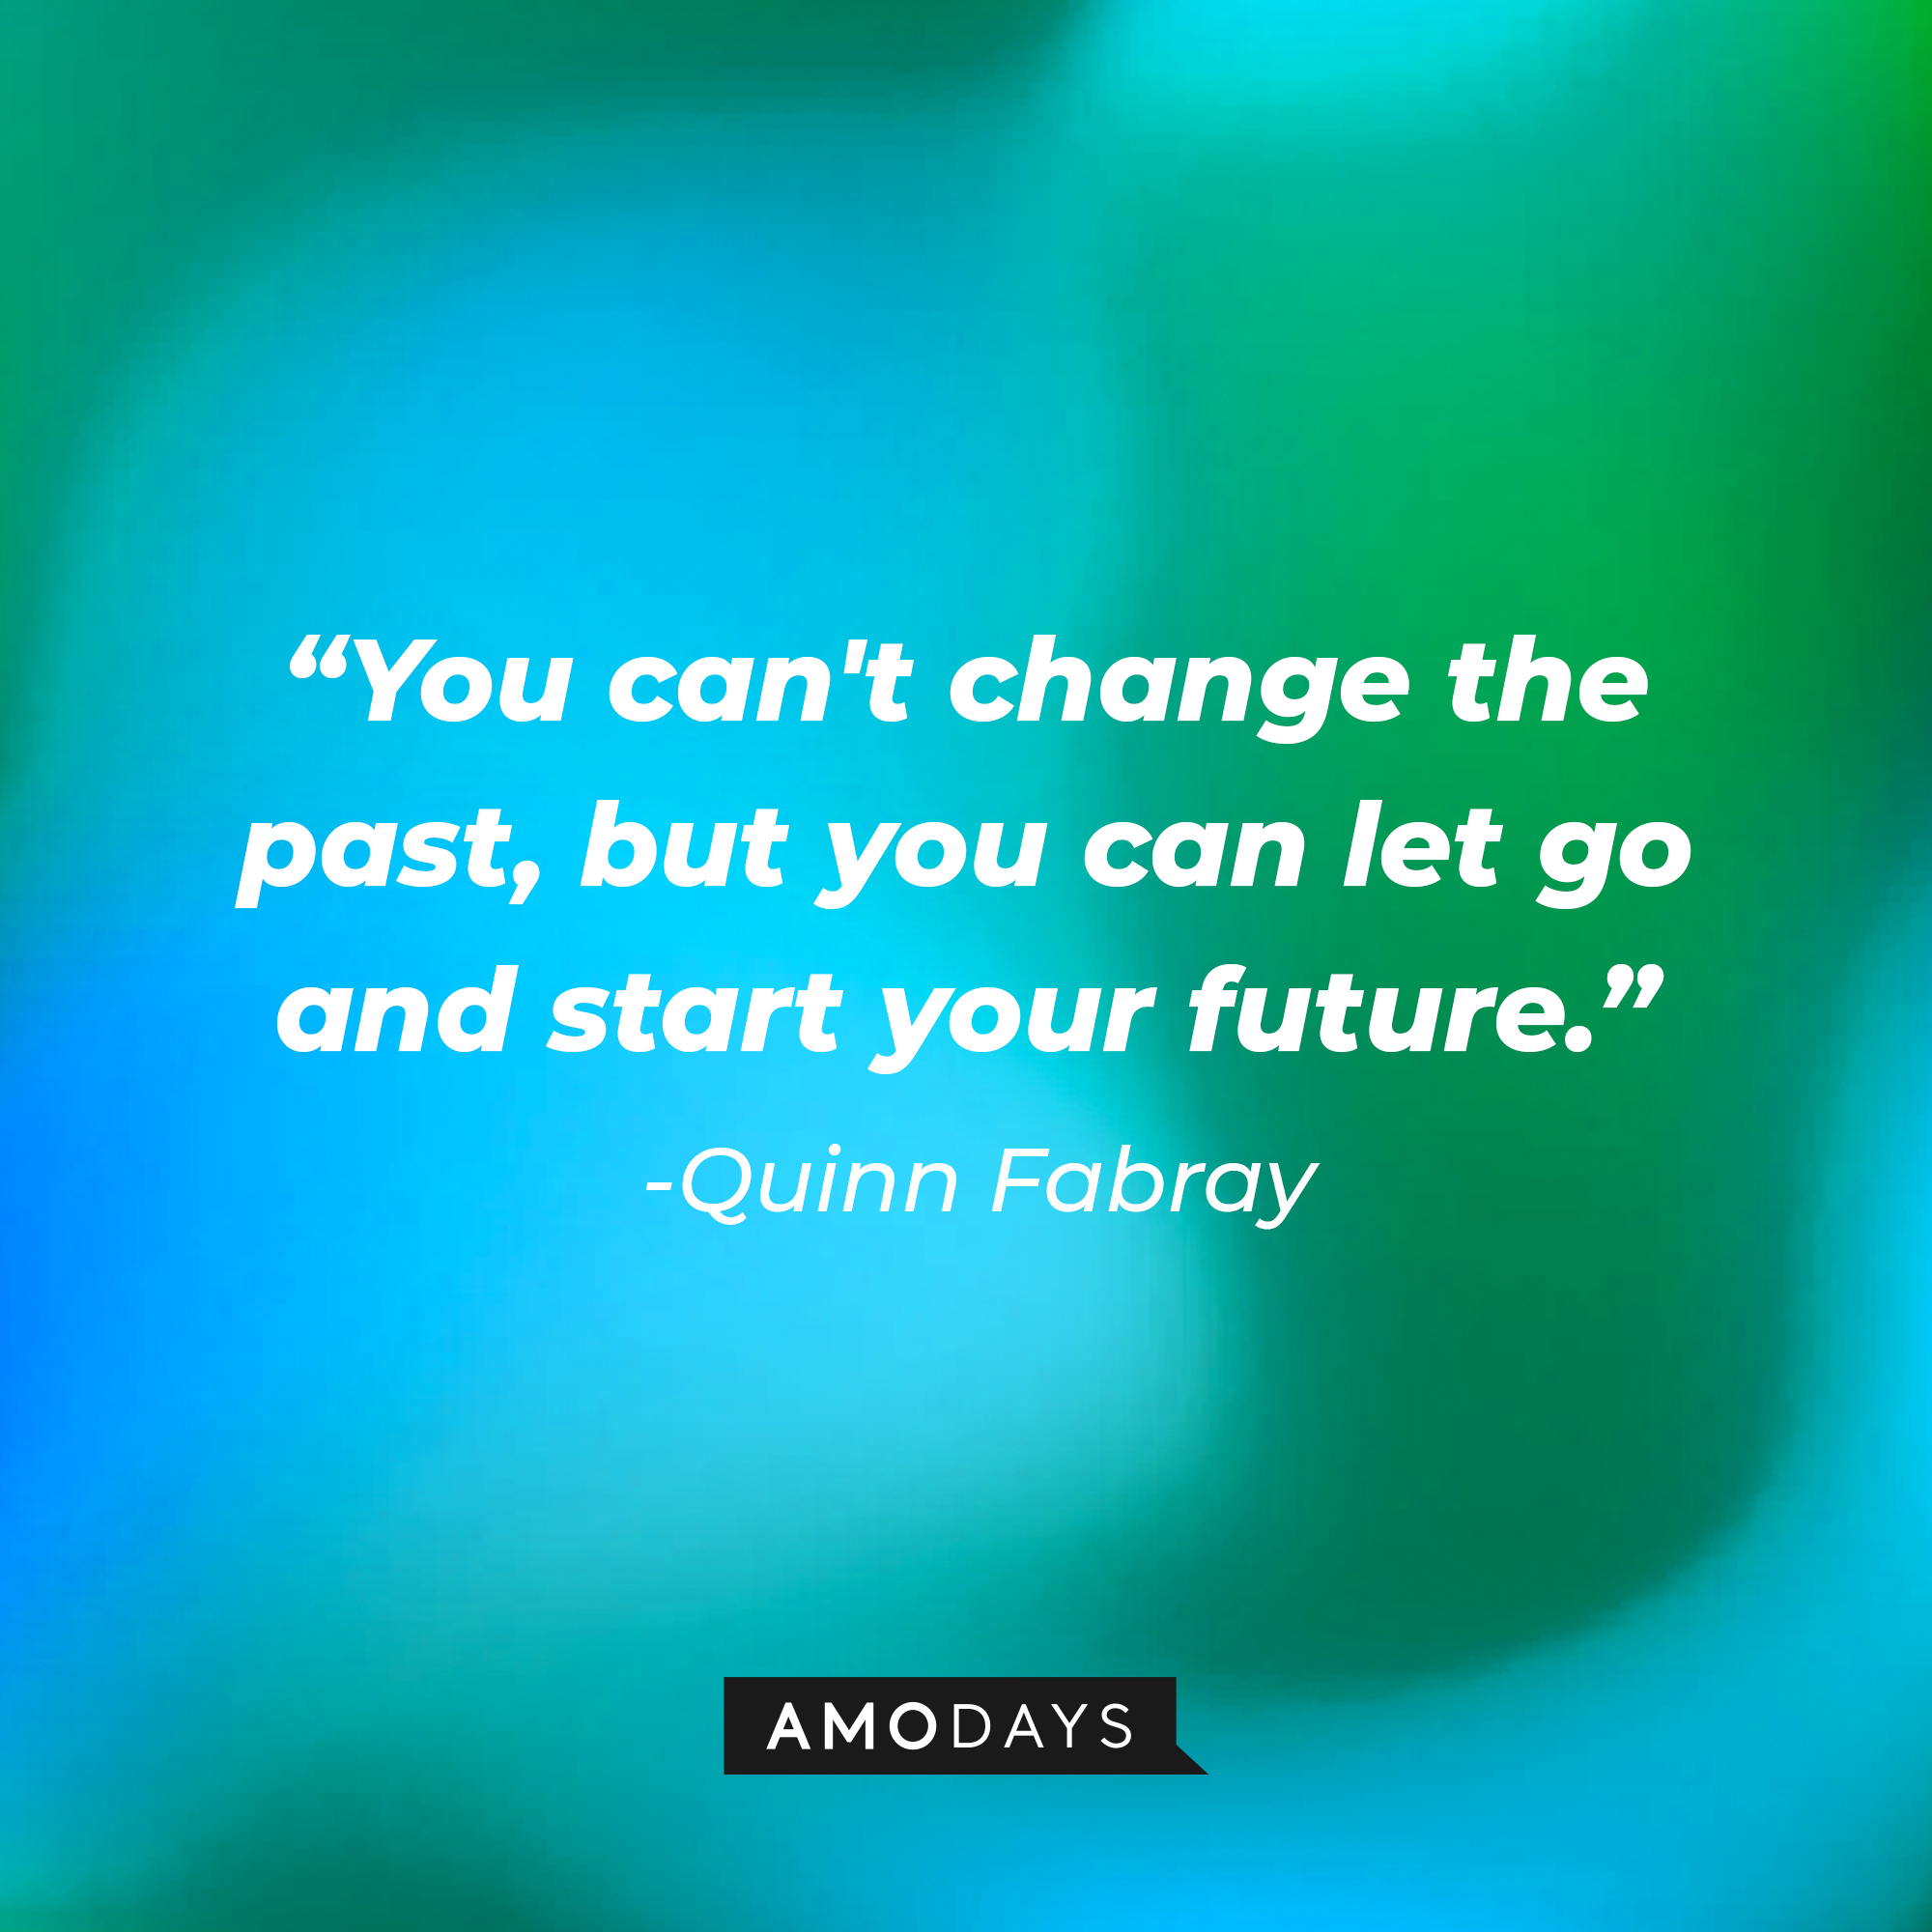 Quinn Fabray’s quote from “Glee”: "You can't change the past, but you can let go and start your future." | Image: AmoDays